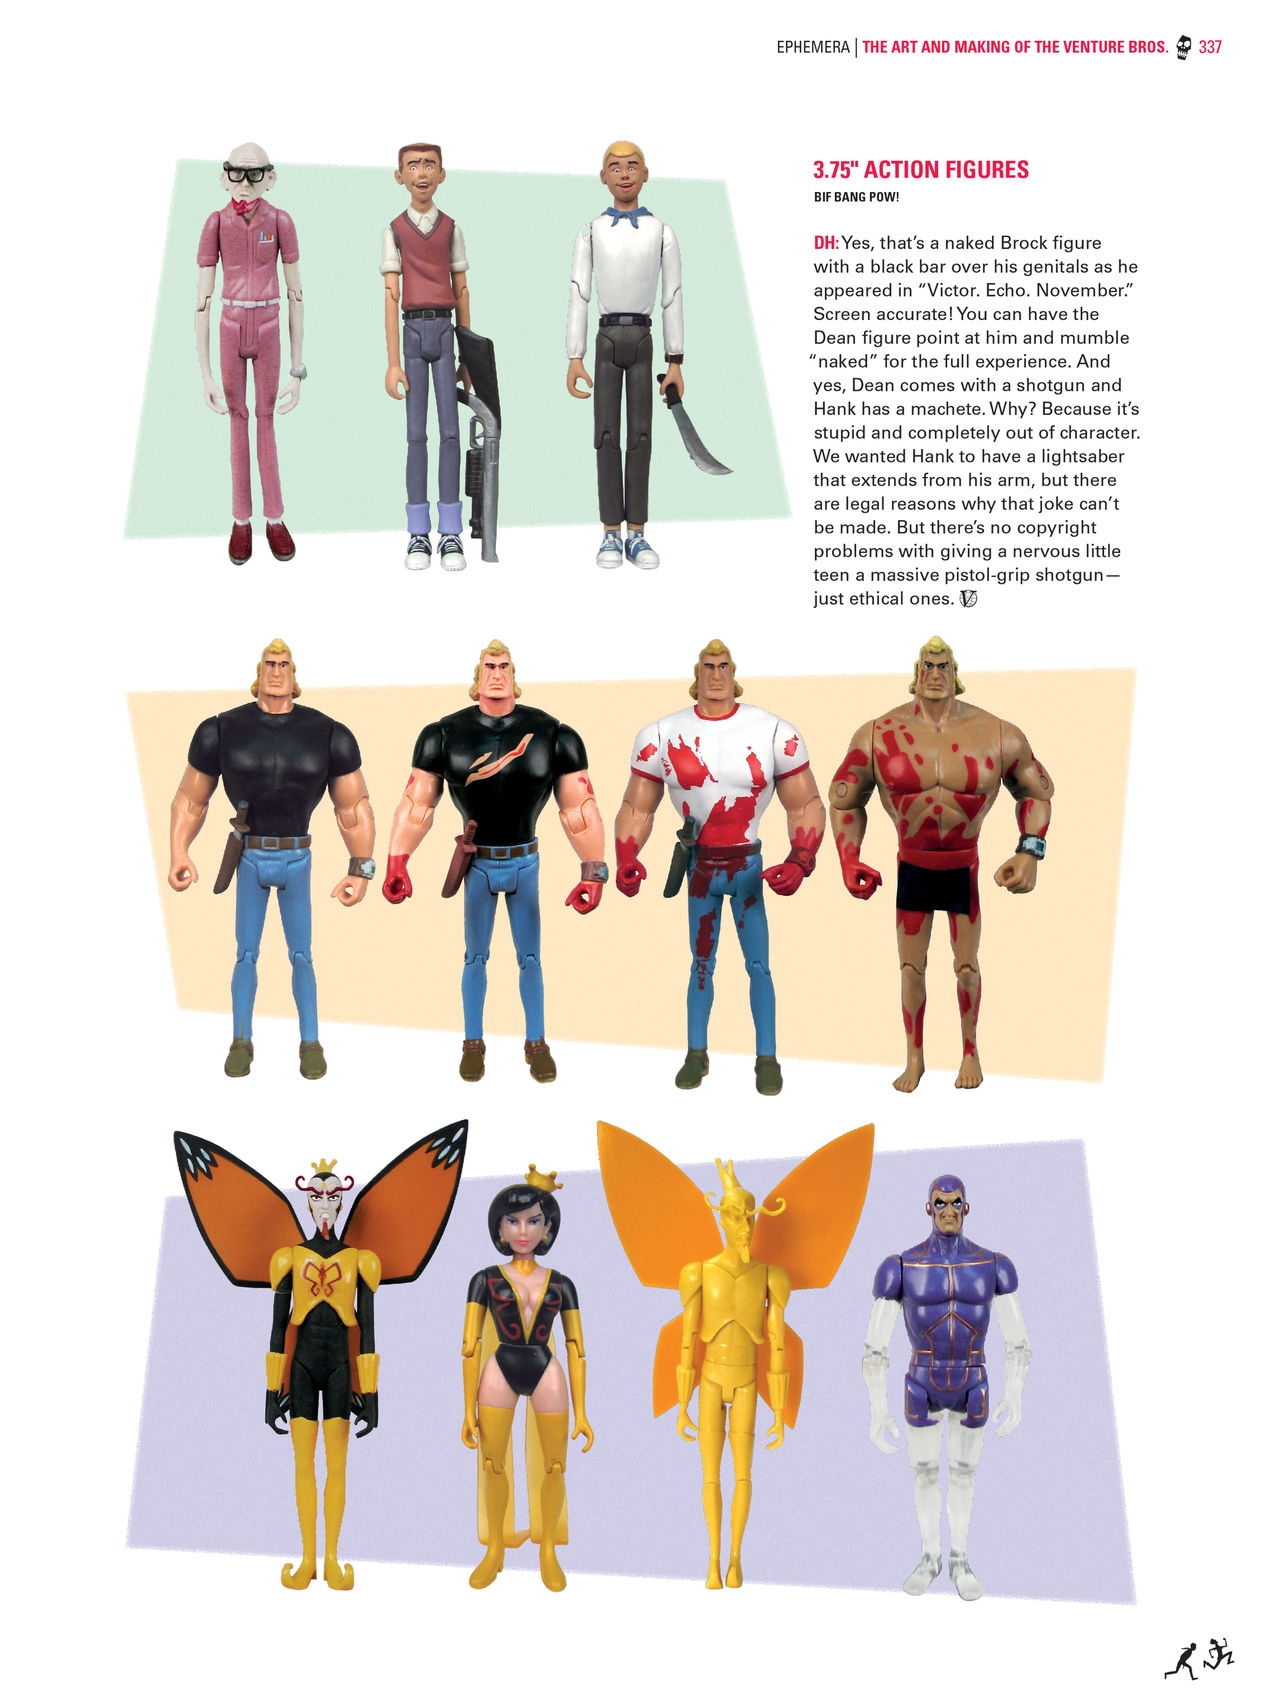 Go Team Venture! - The Art and Making of the Venture Bros 335